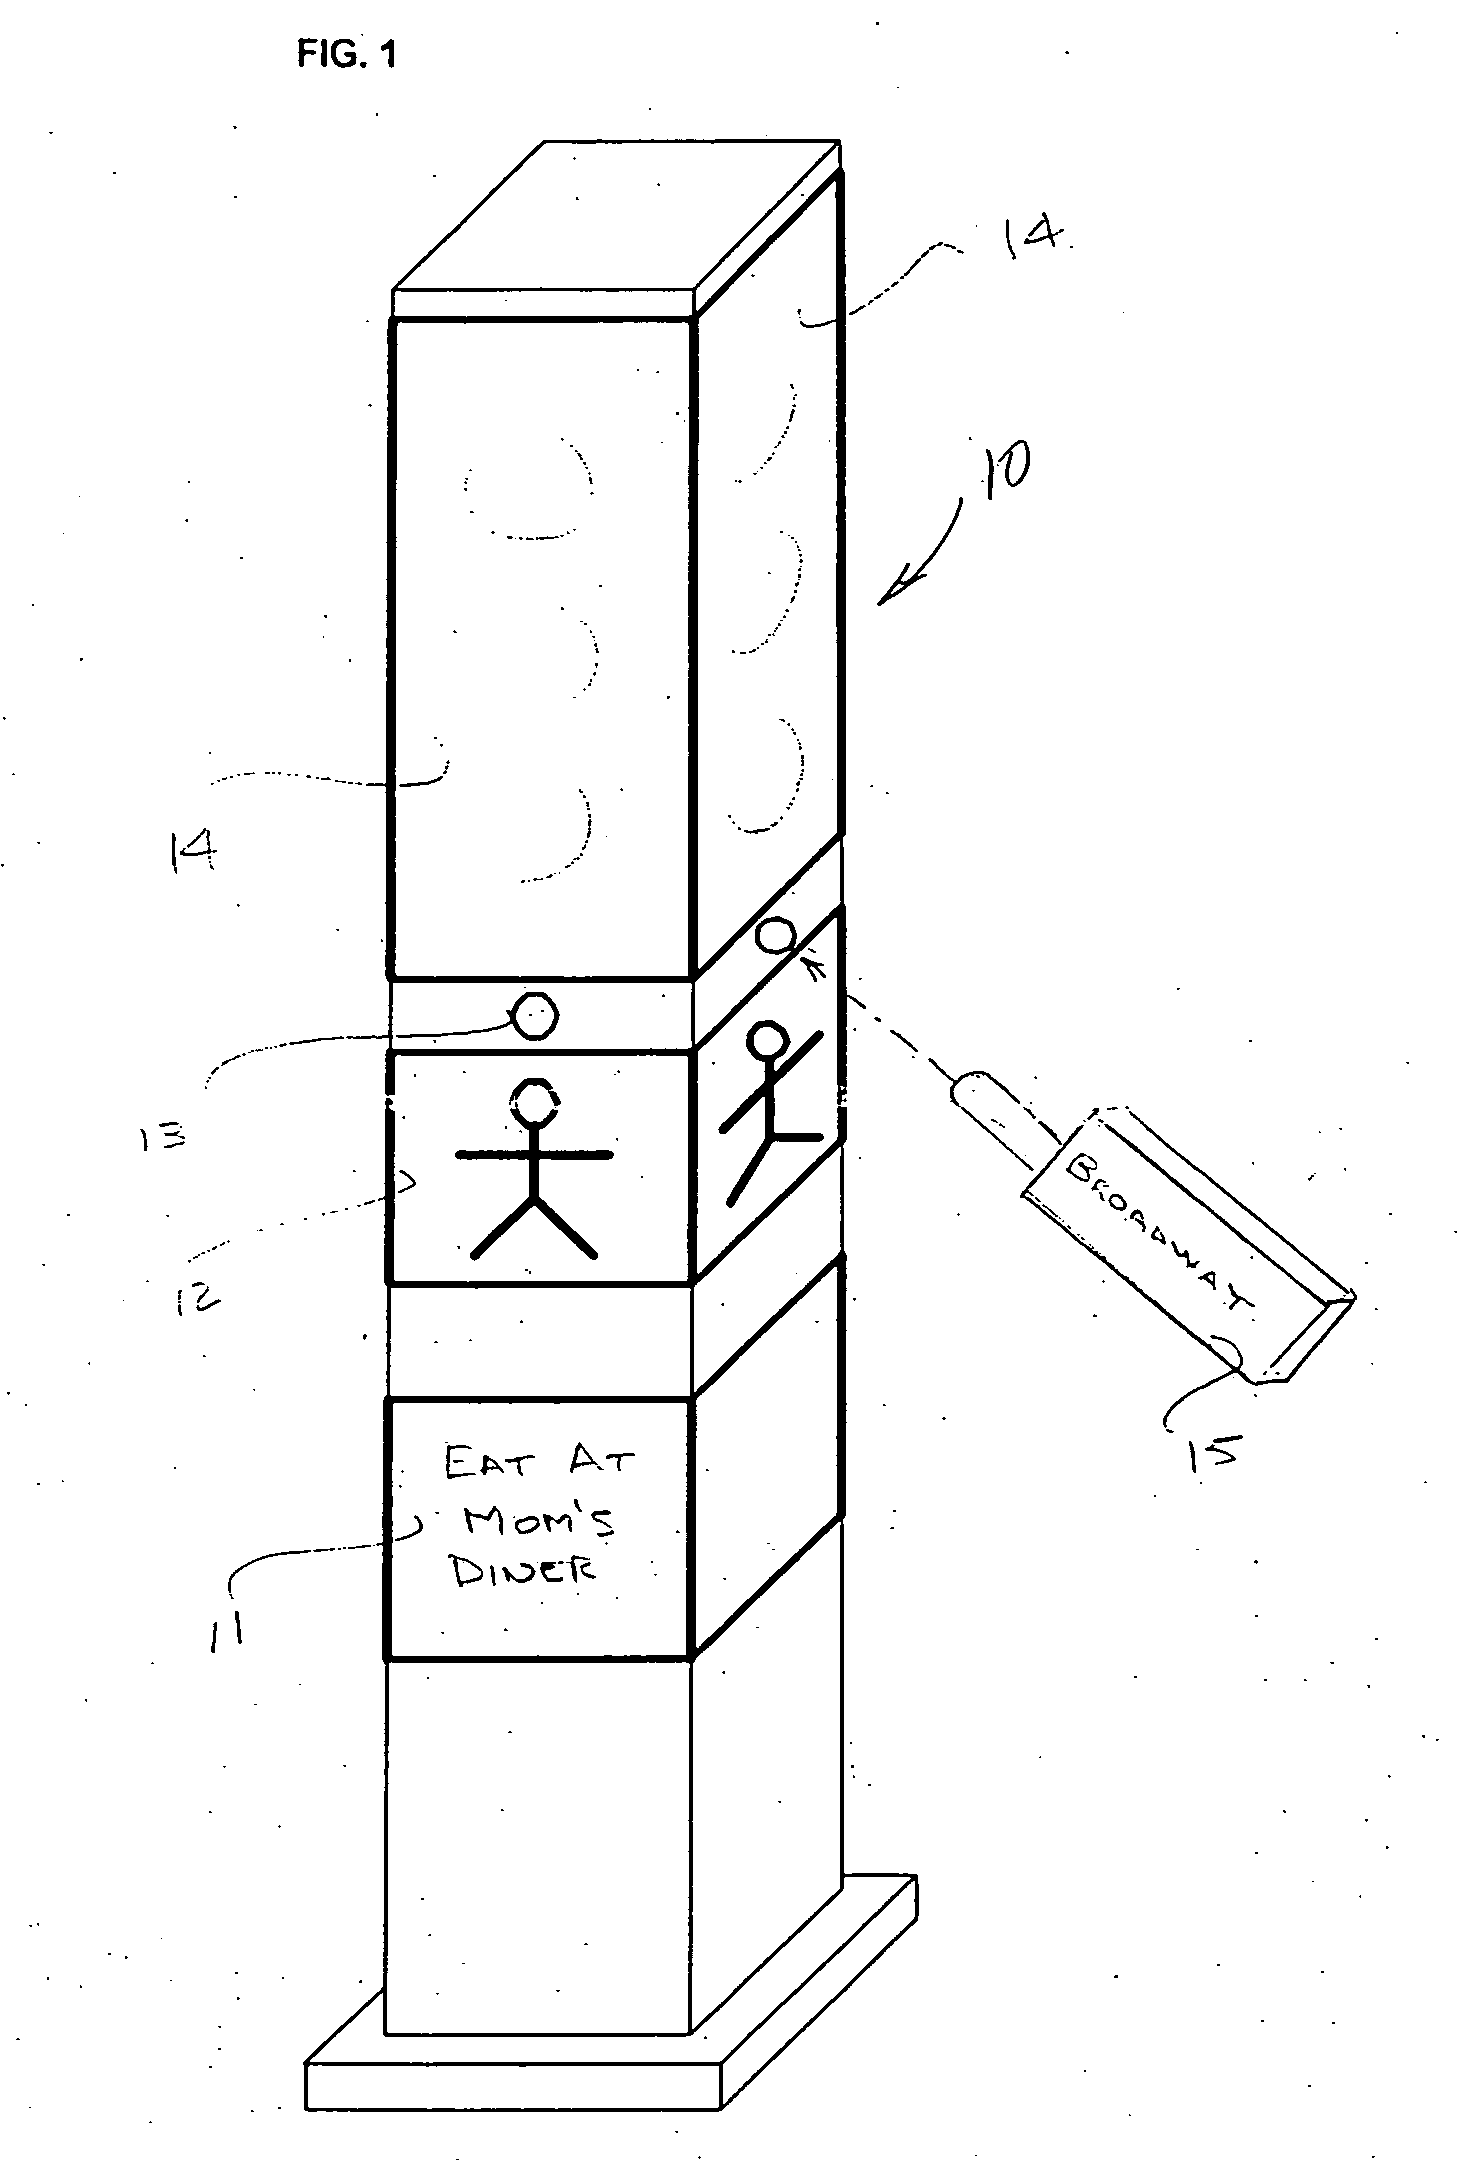 Interactive bulletin board system and method